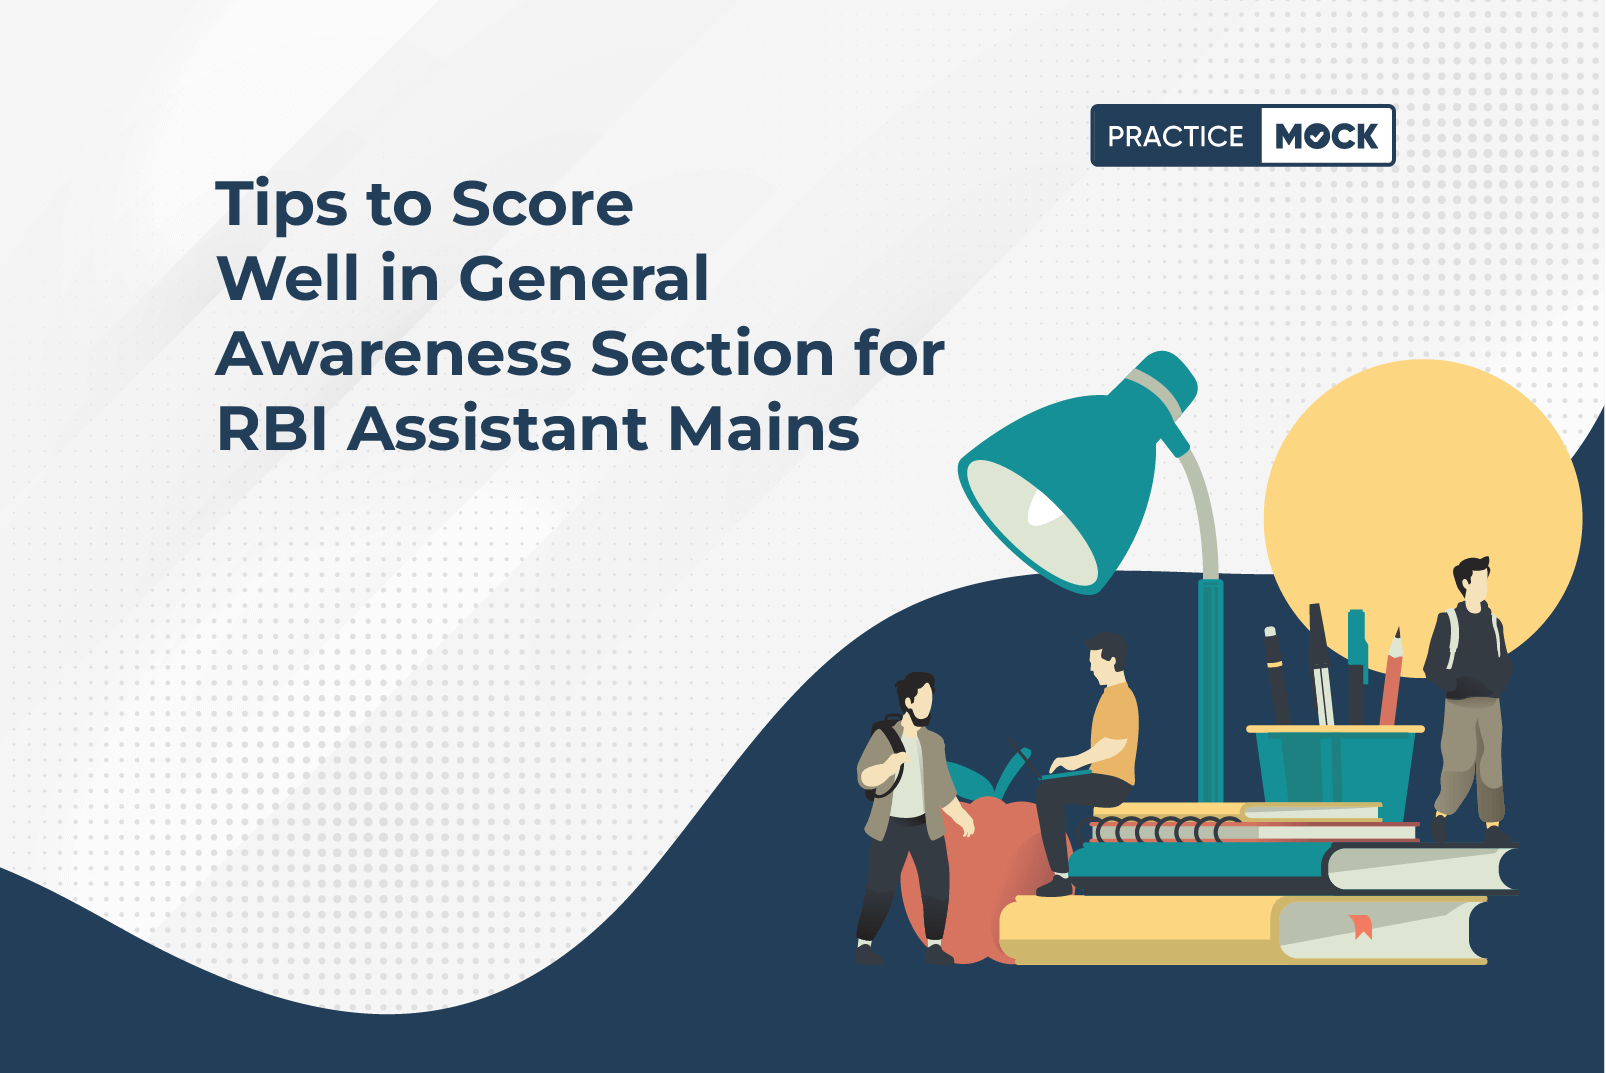 Tips to Score Well in General Awareness Section for RBI Assistant Mains